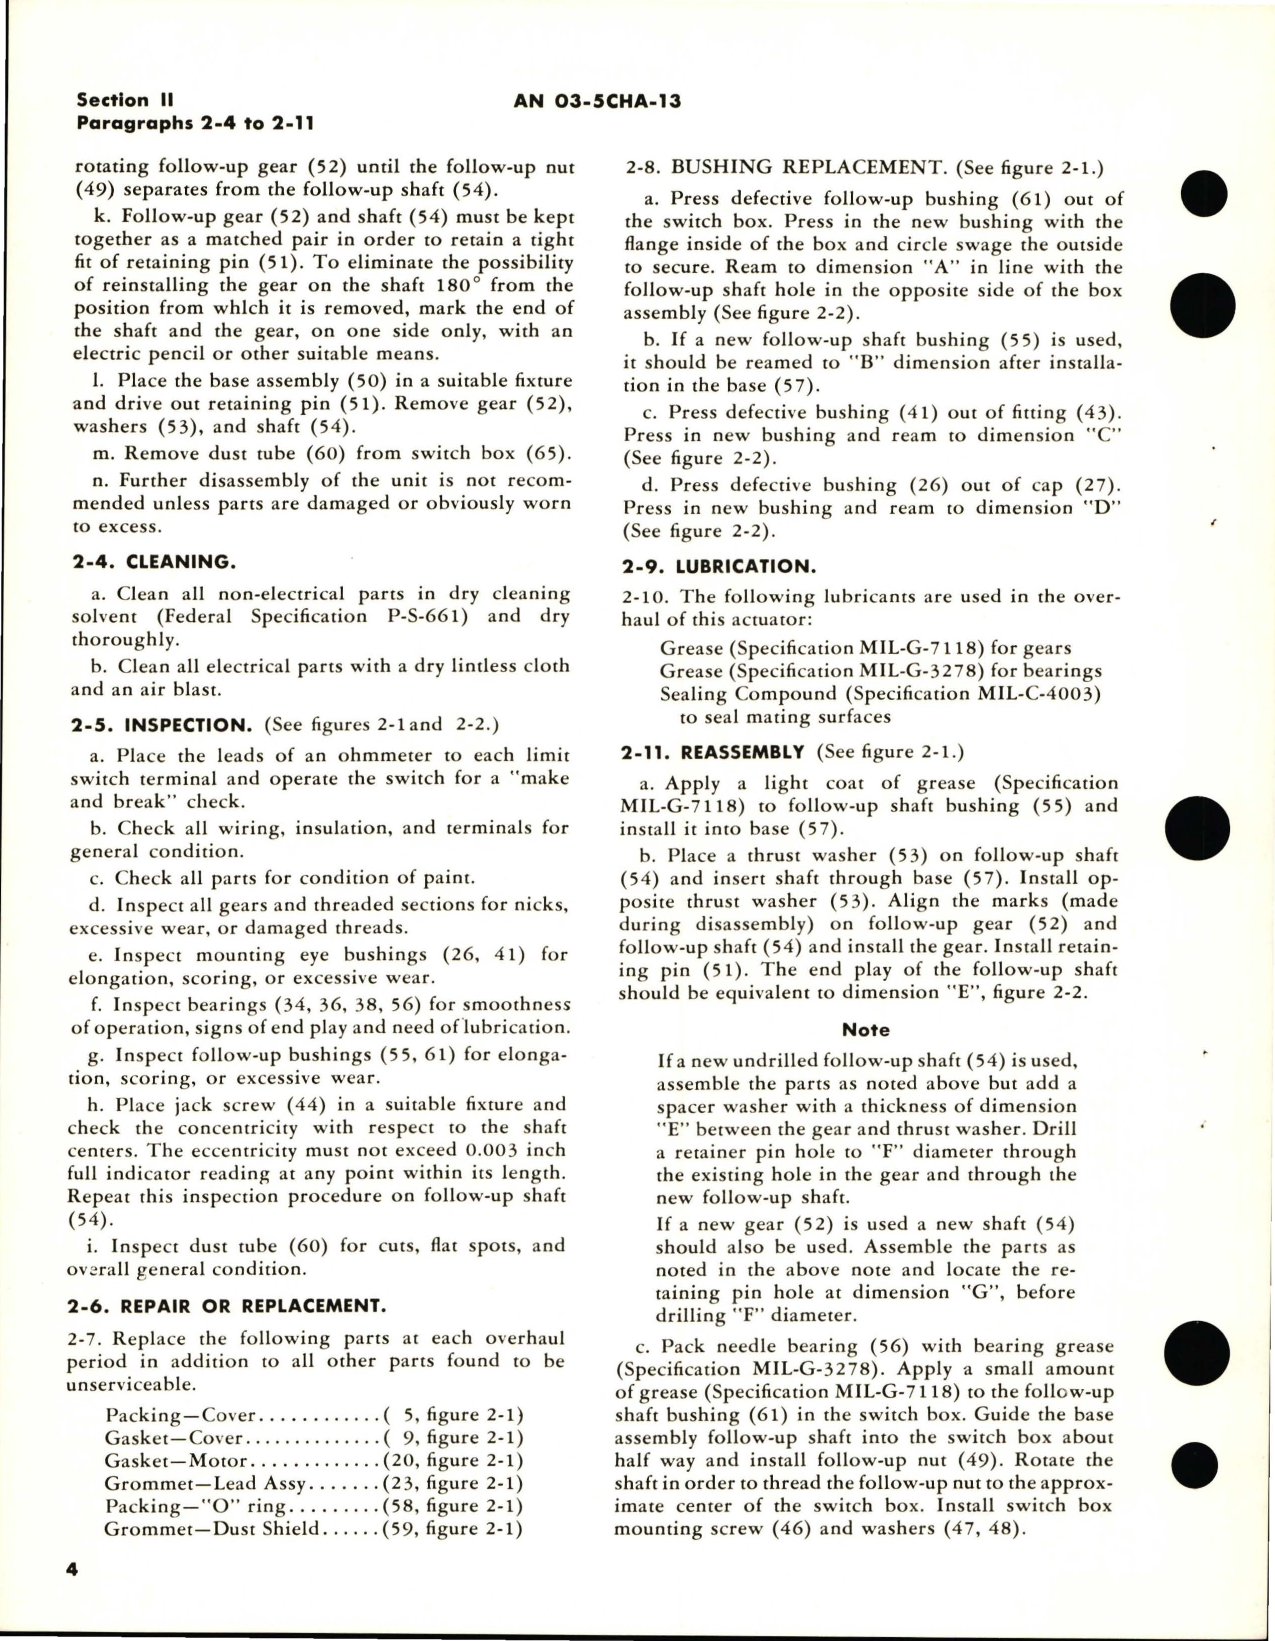 Sample page 8 from AirCorps Library document: Overhaul Instructions for Electro-Mechanical Linear Actuators 